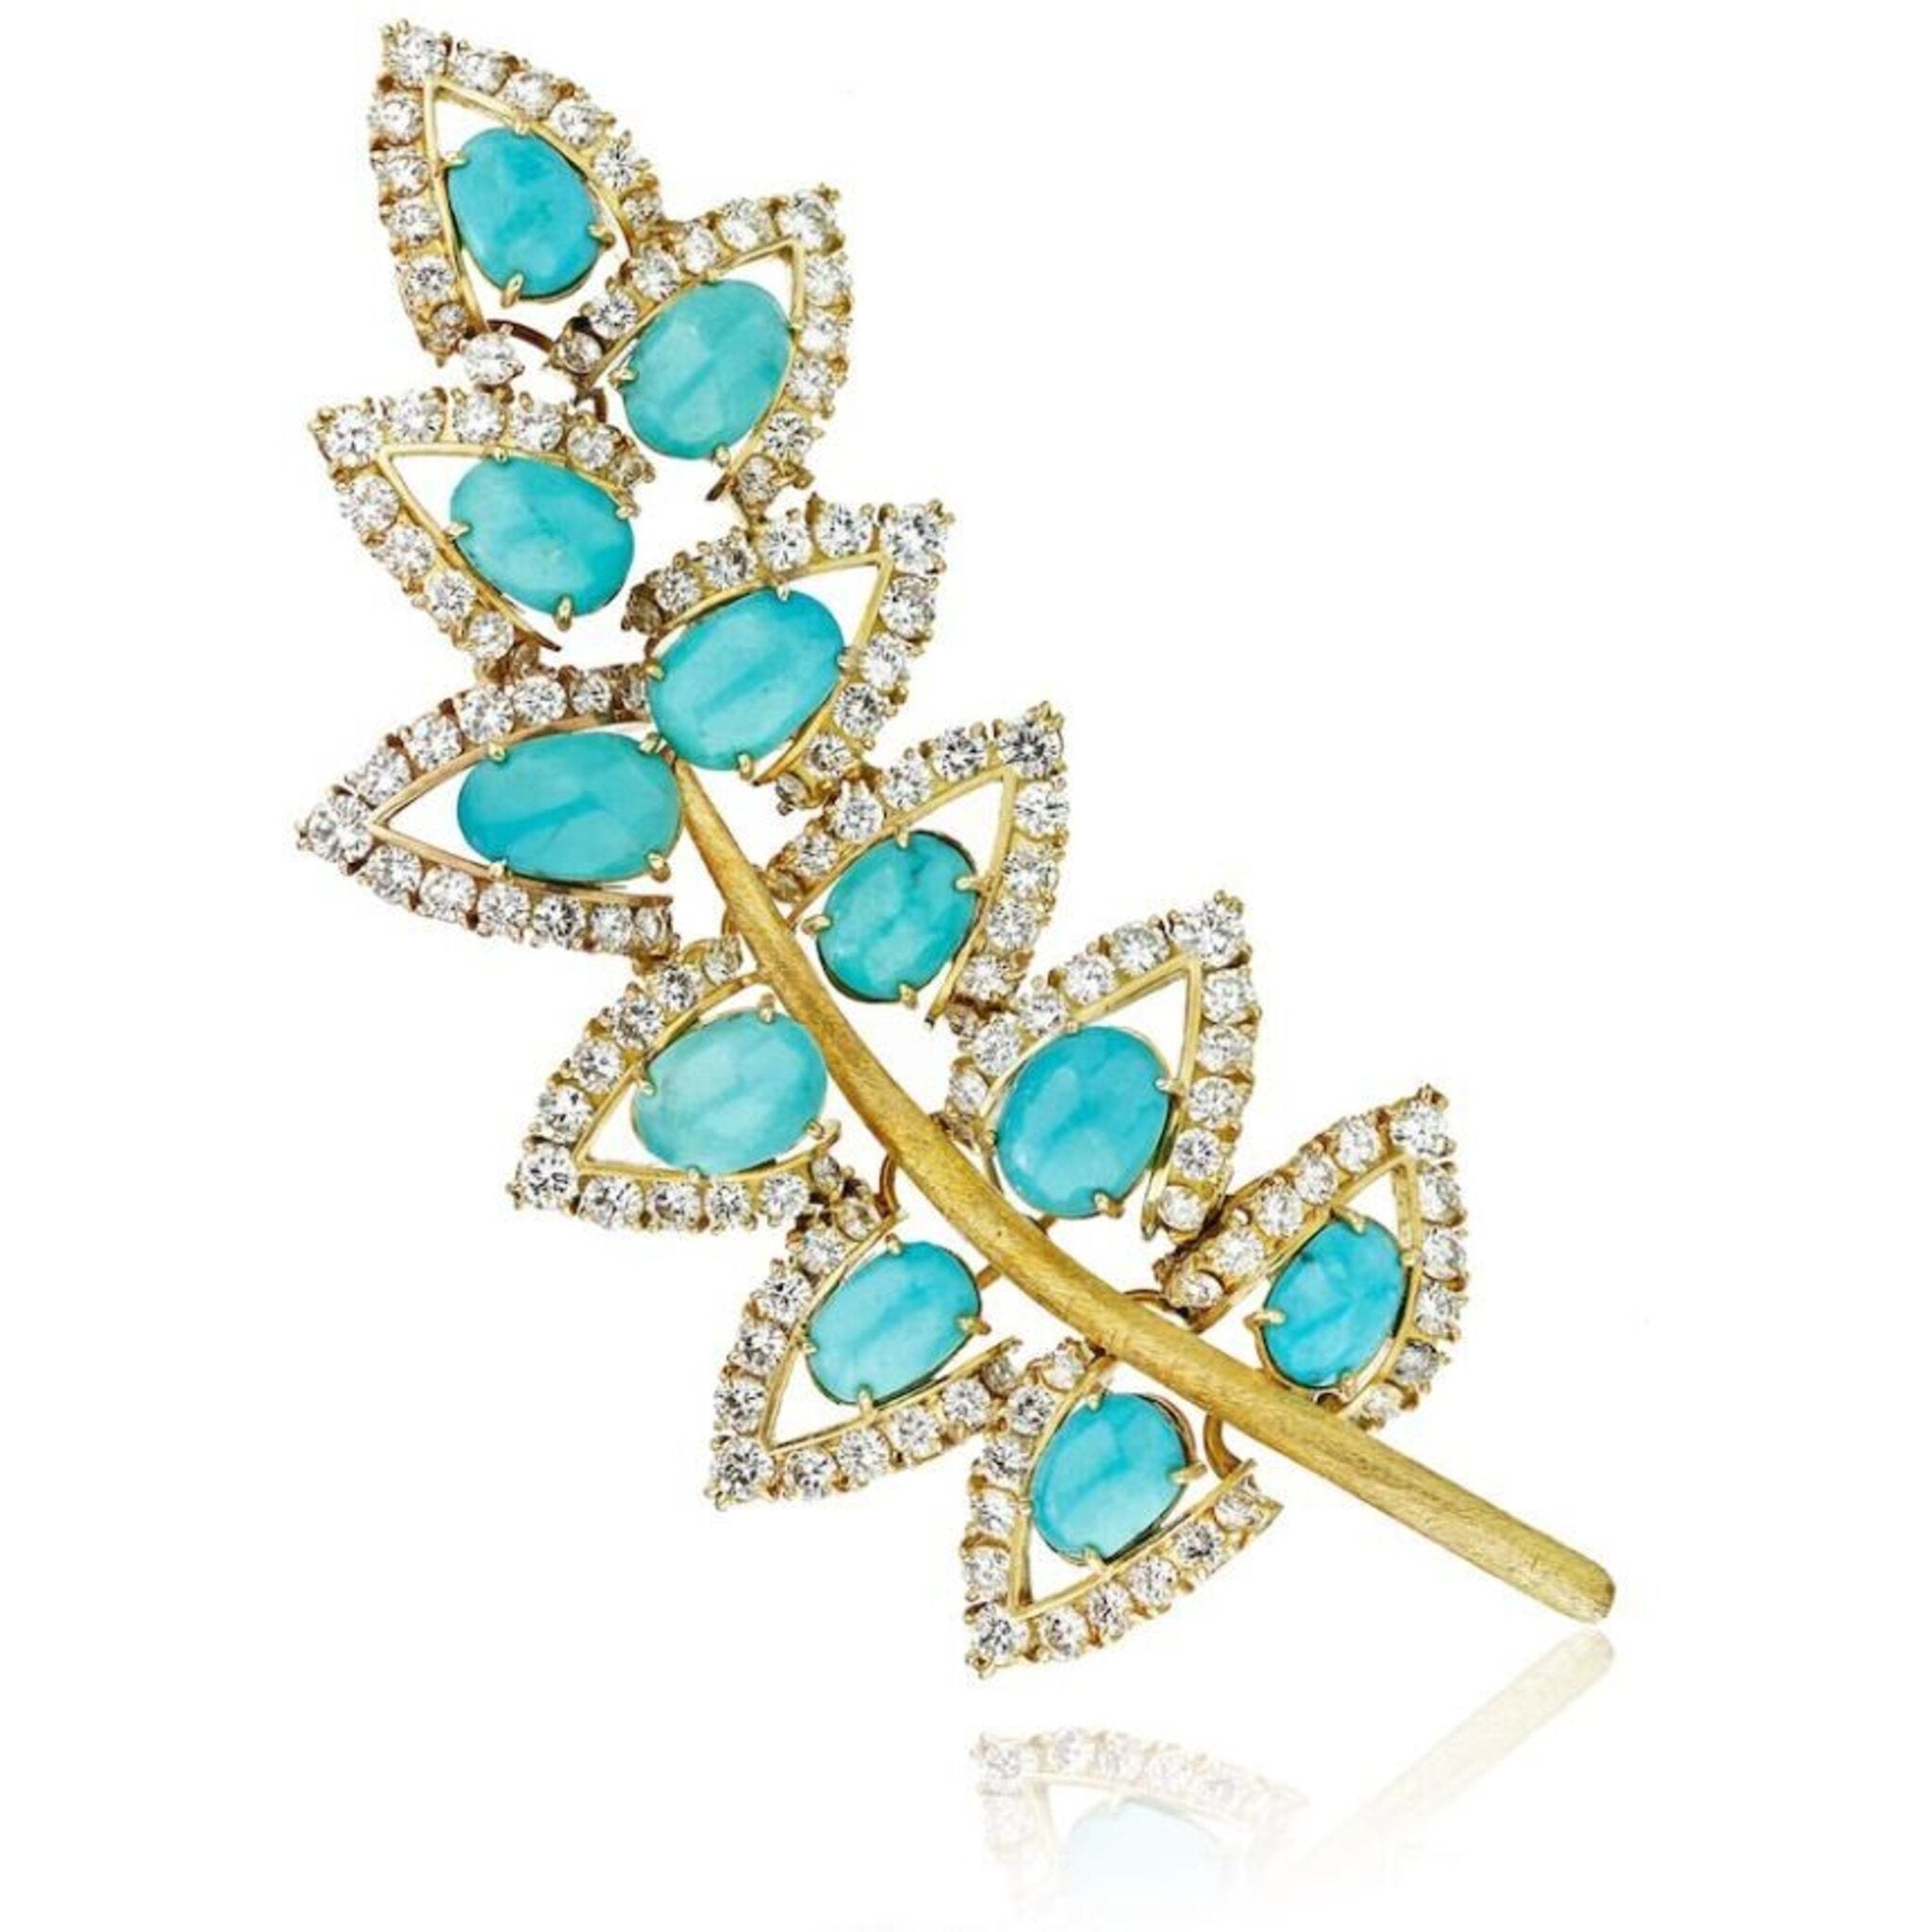 Circa 1960's 18K Yellow Gold Turquoise Leaf Brooch